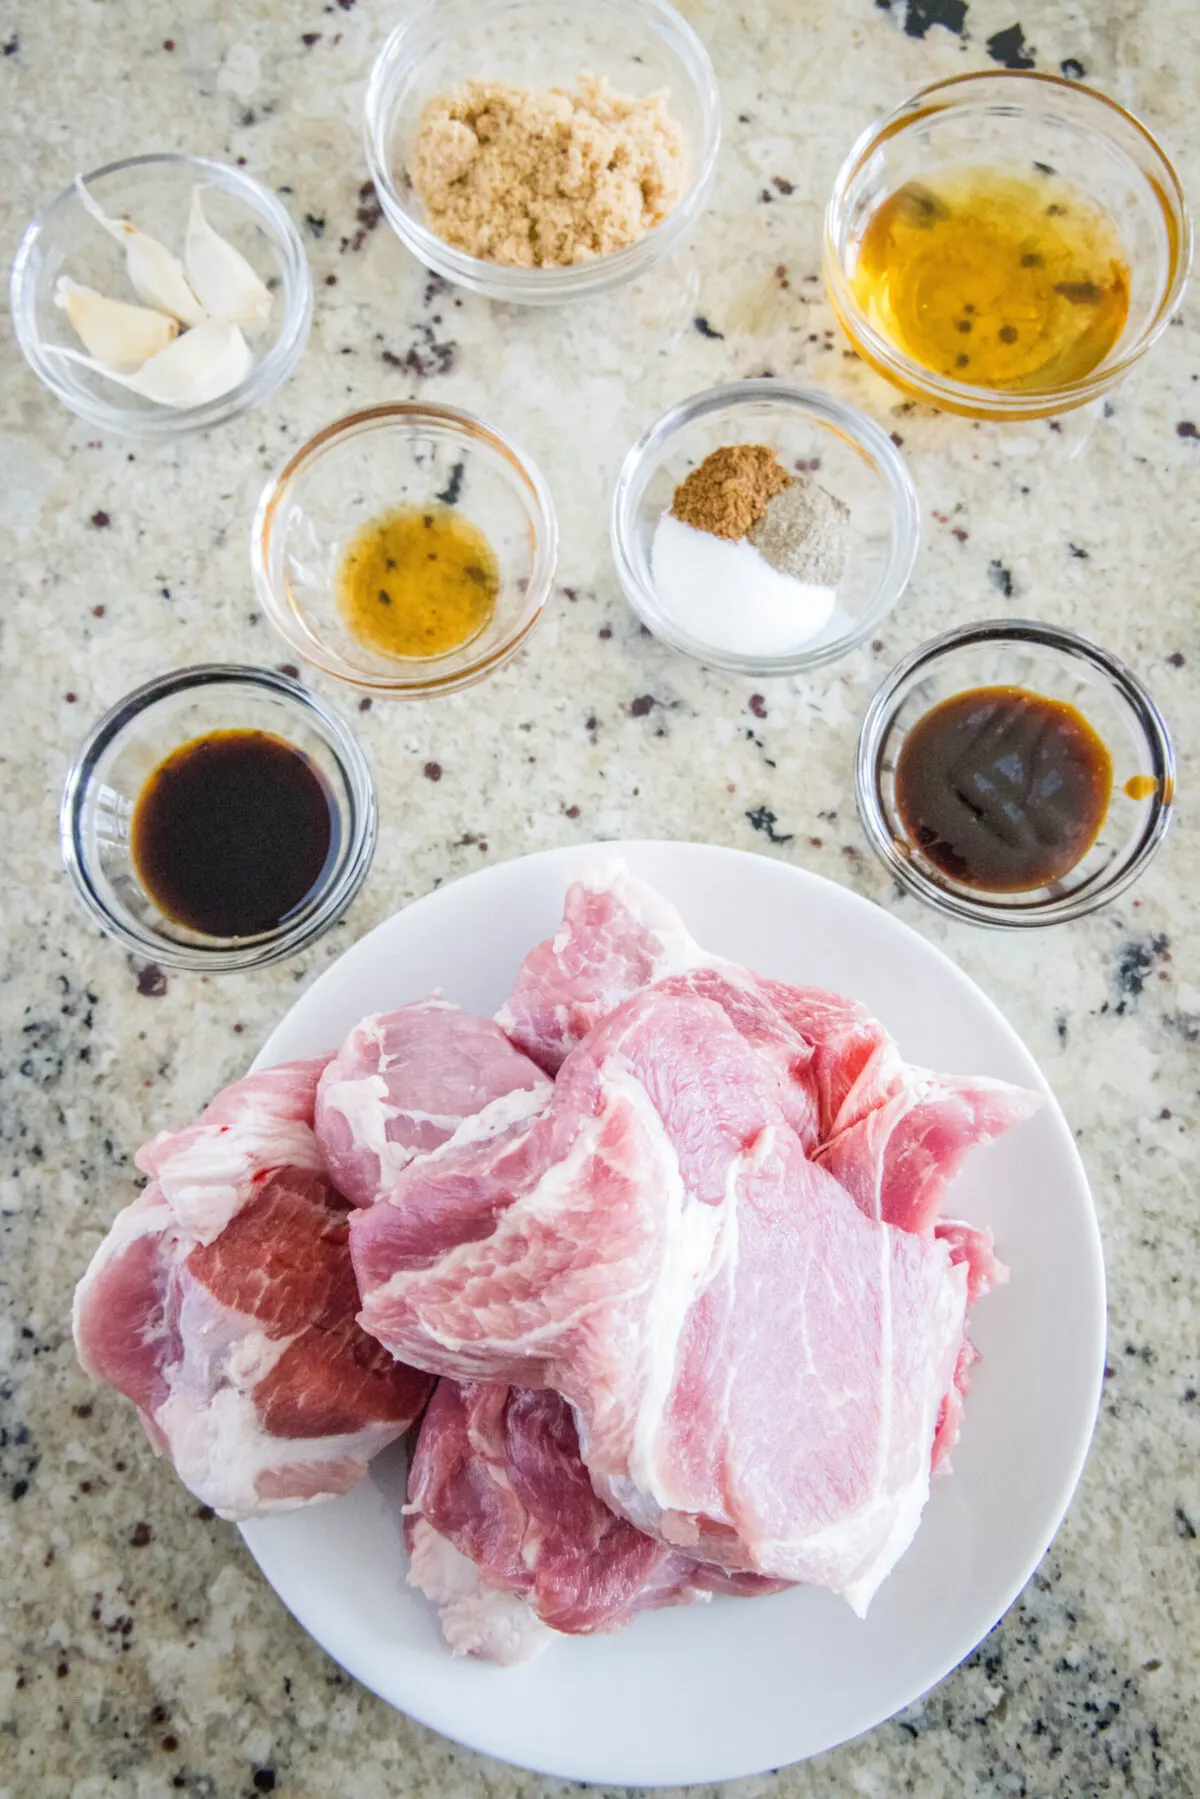 Overhead view of the ingredients needed for char siu pork: a plate of raw pork shoulder, a bowl of soy sauce, a bowl of hoisin, a bowl of garlic, a bowl of sesame oil, a bowl of brown sugar, a bowl of honey, and a bowl with salt, pepper, and five-spice.